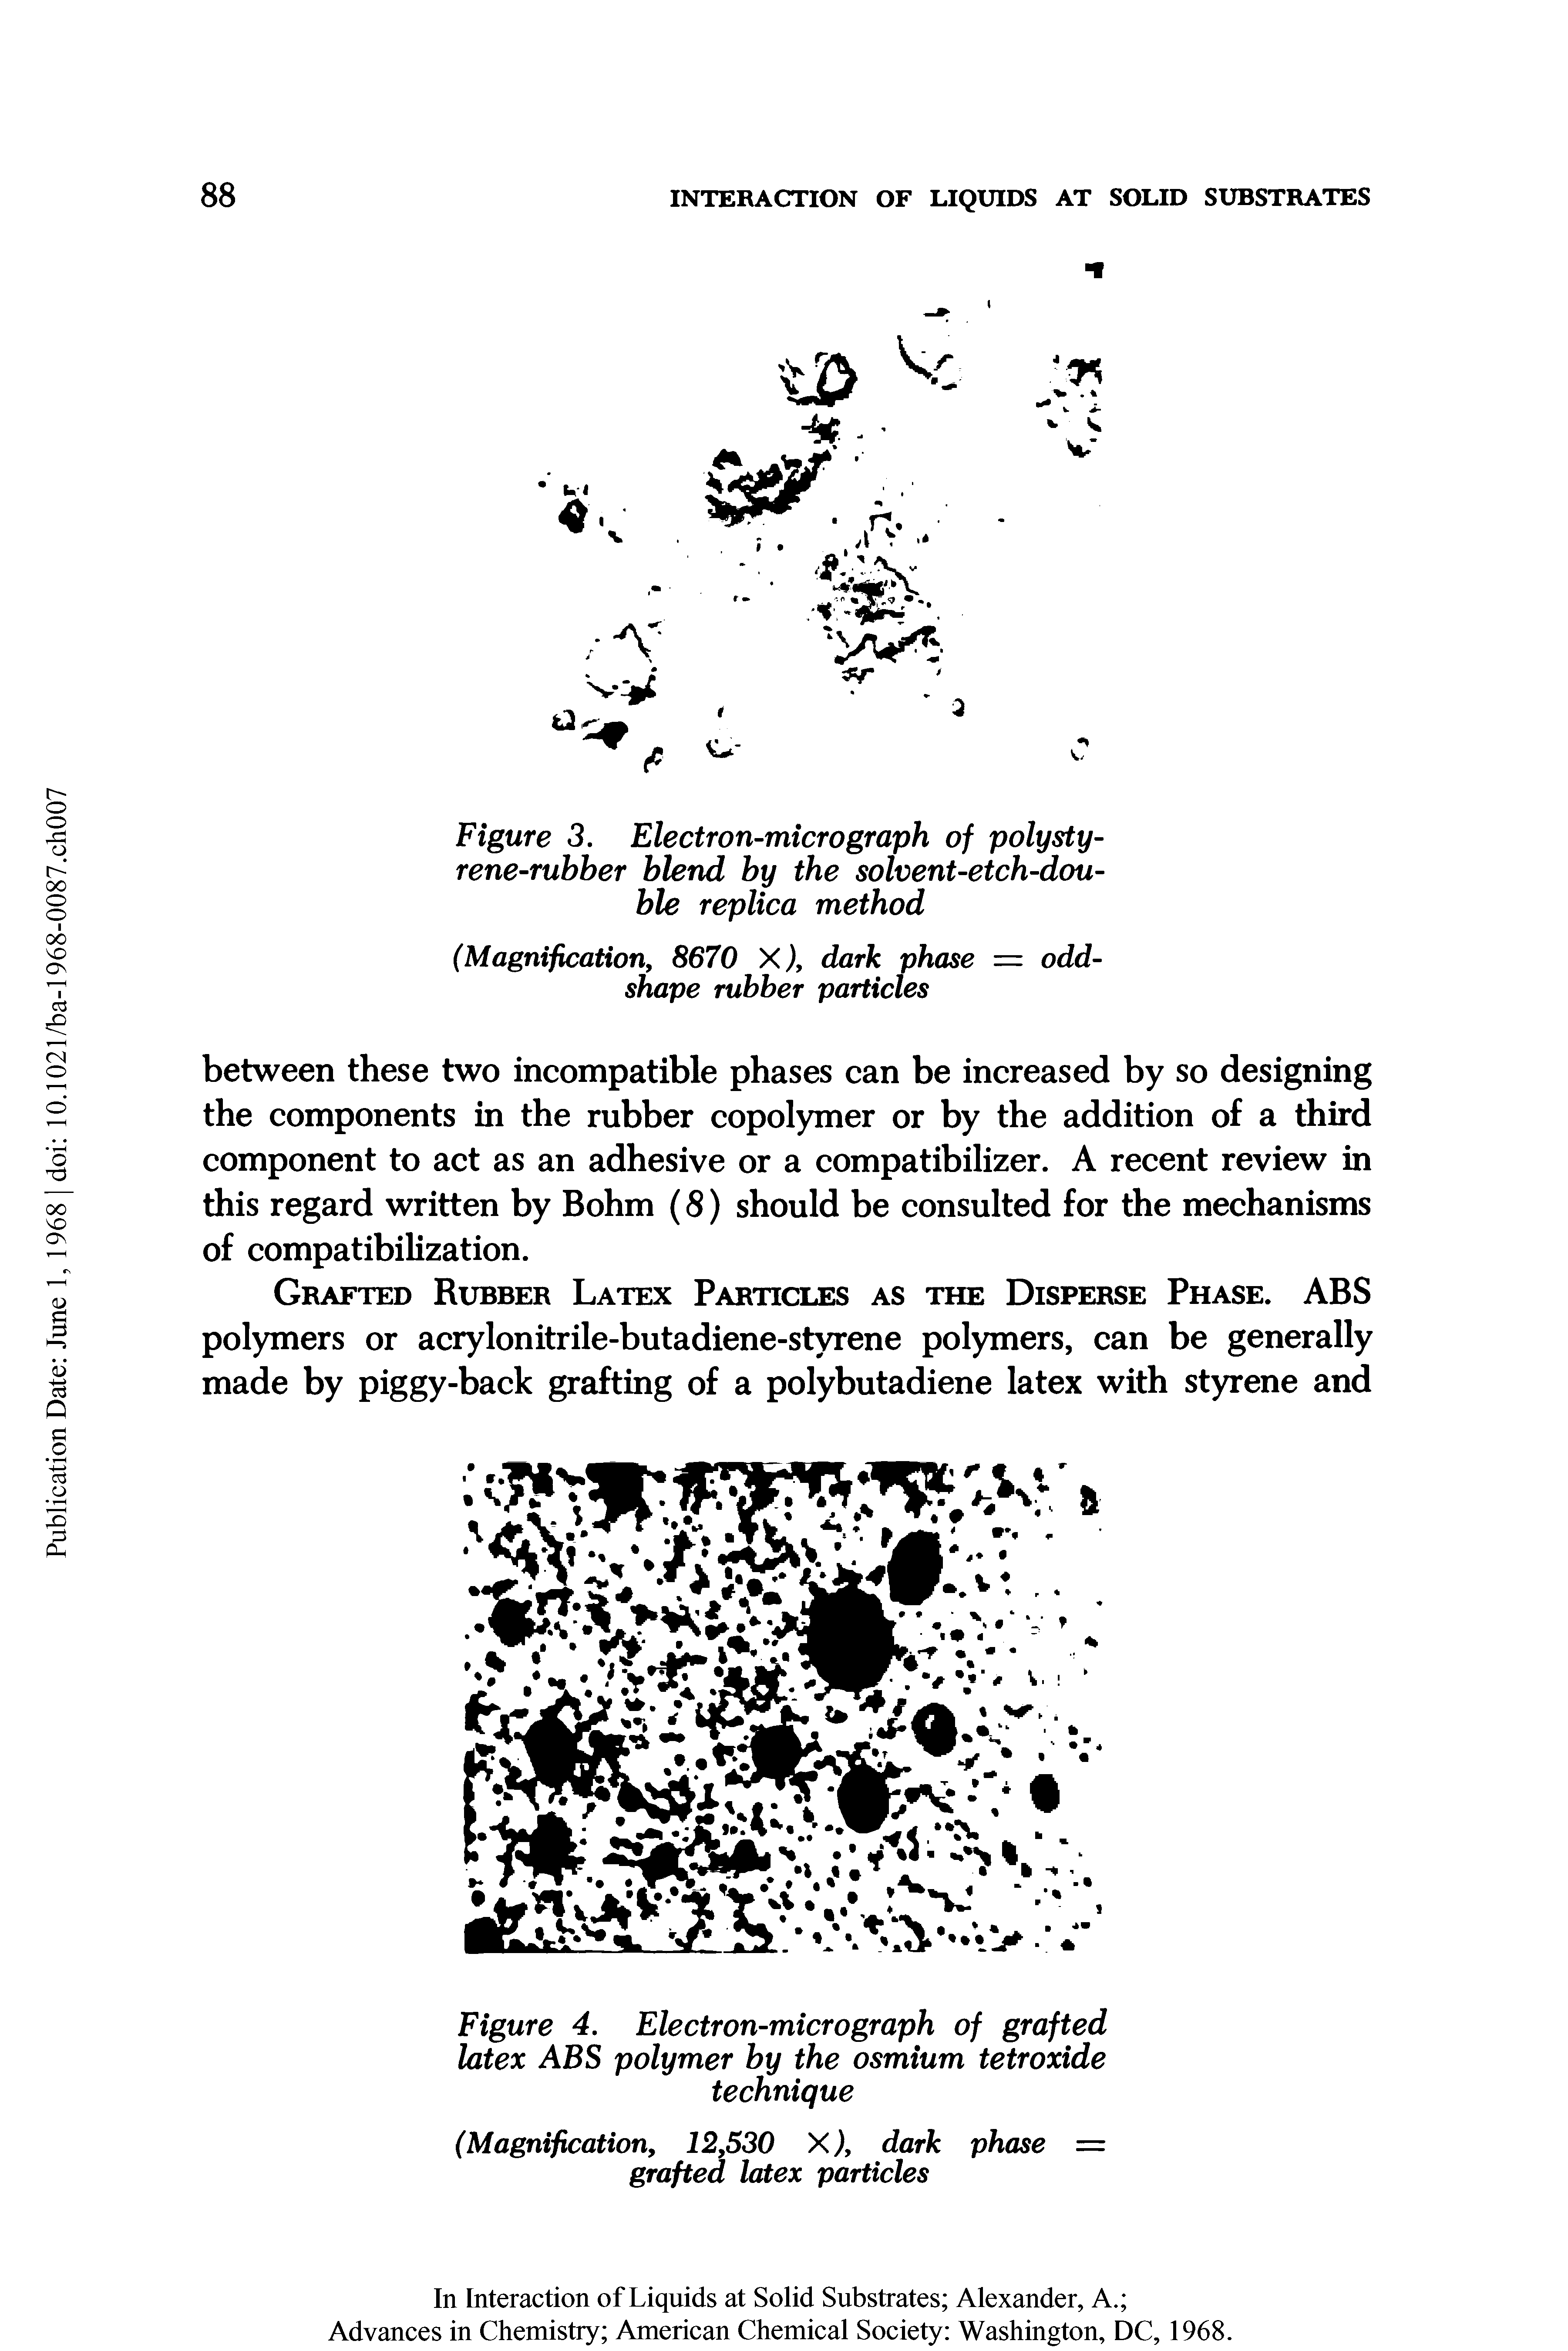 Figure 3. Electron-micrograph of polystyrene-rubber blend by the solvent-etch-double replica method...